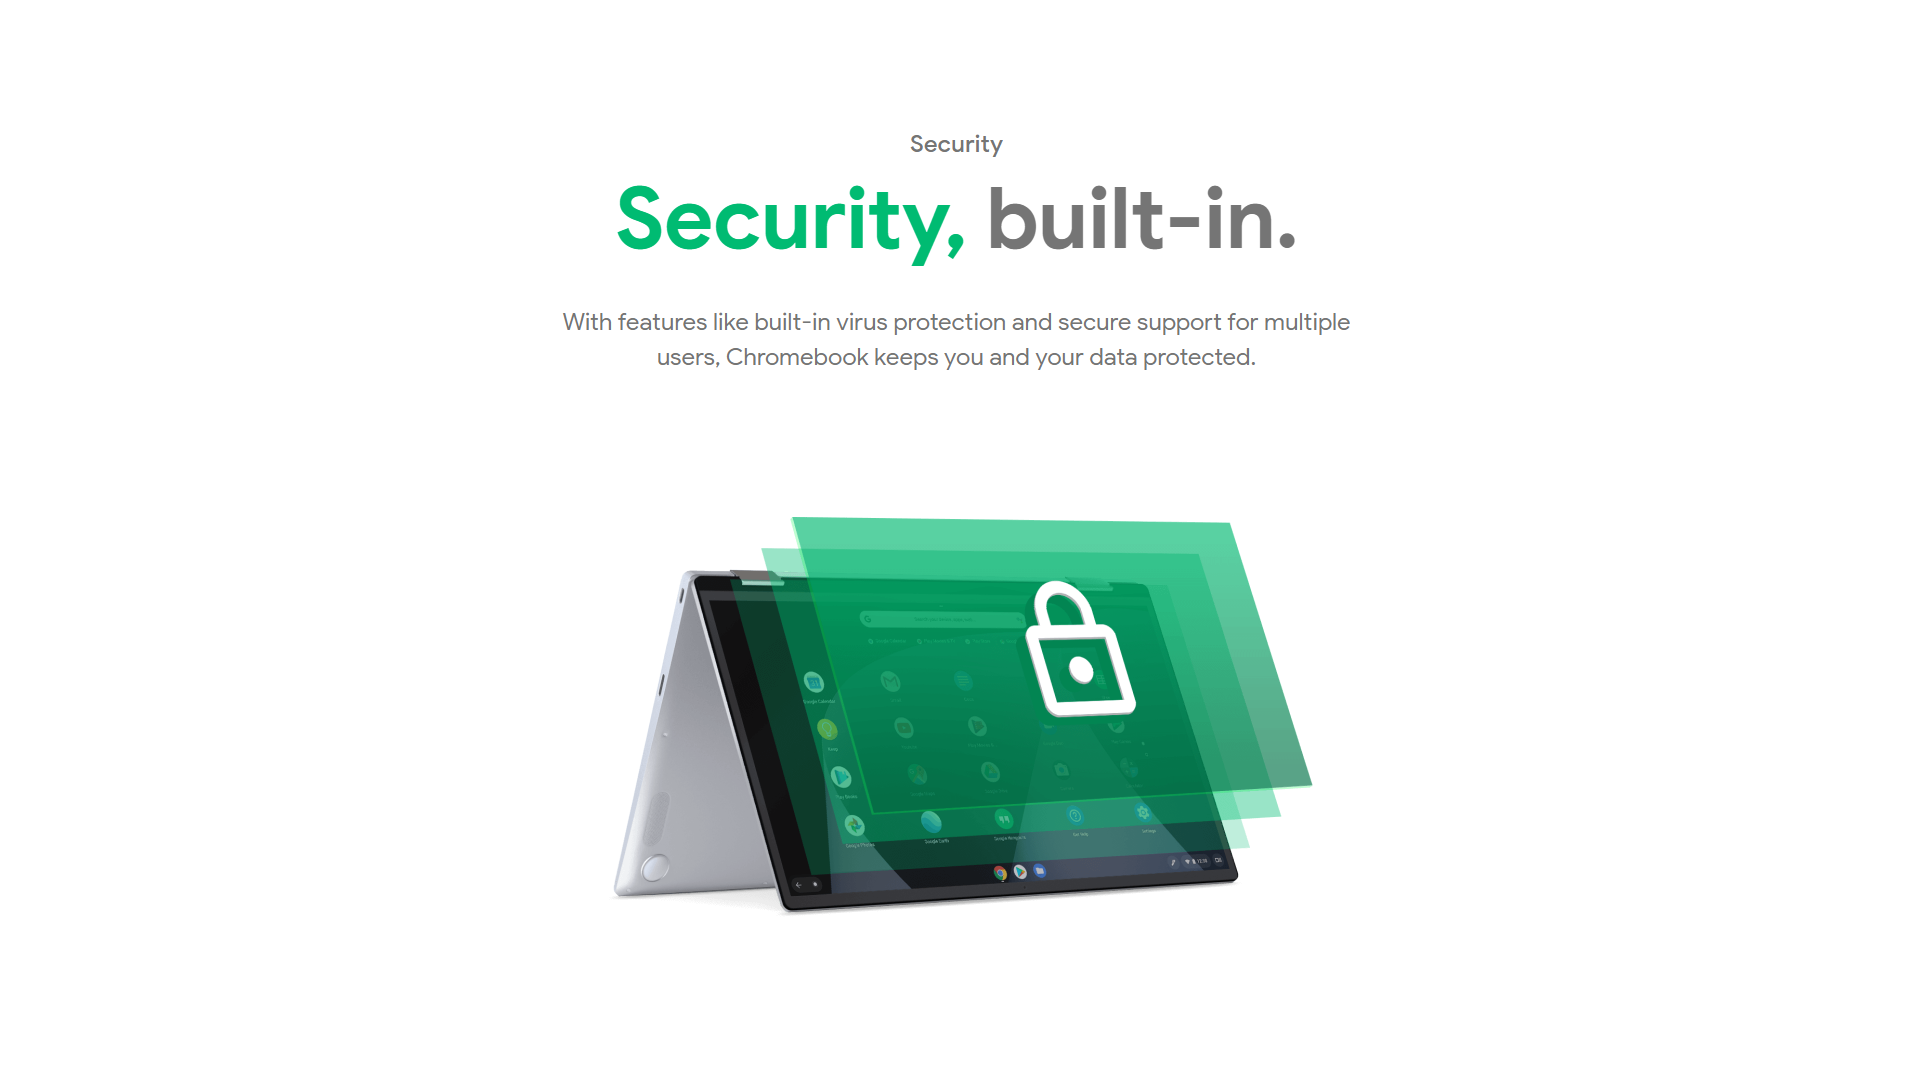 Built-in security on Chromebooks